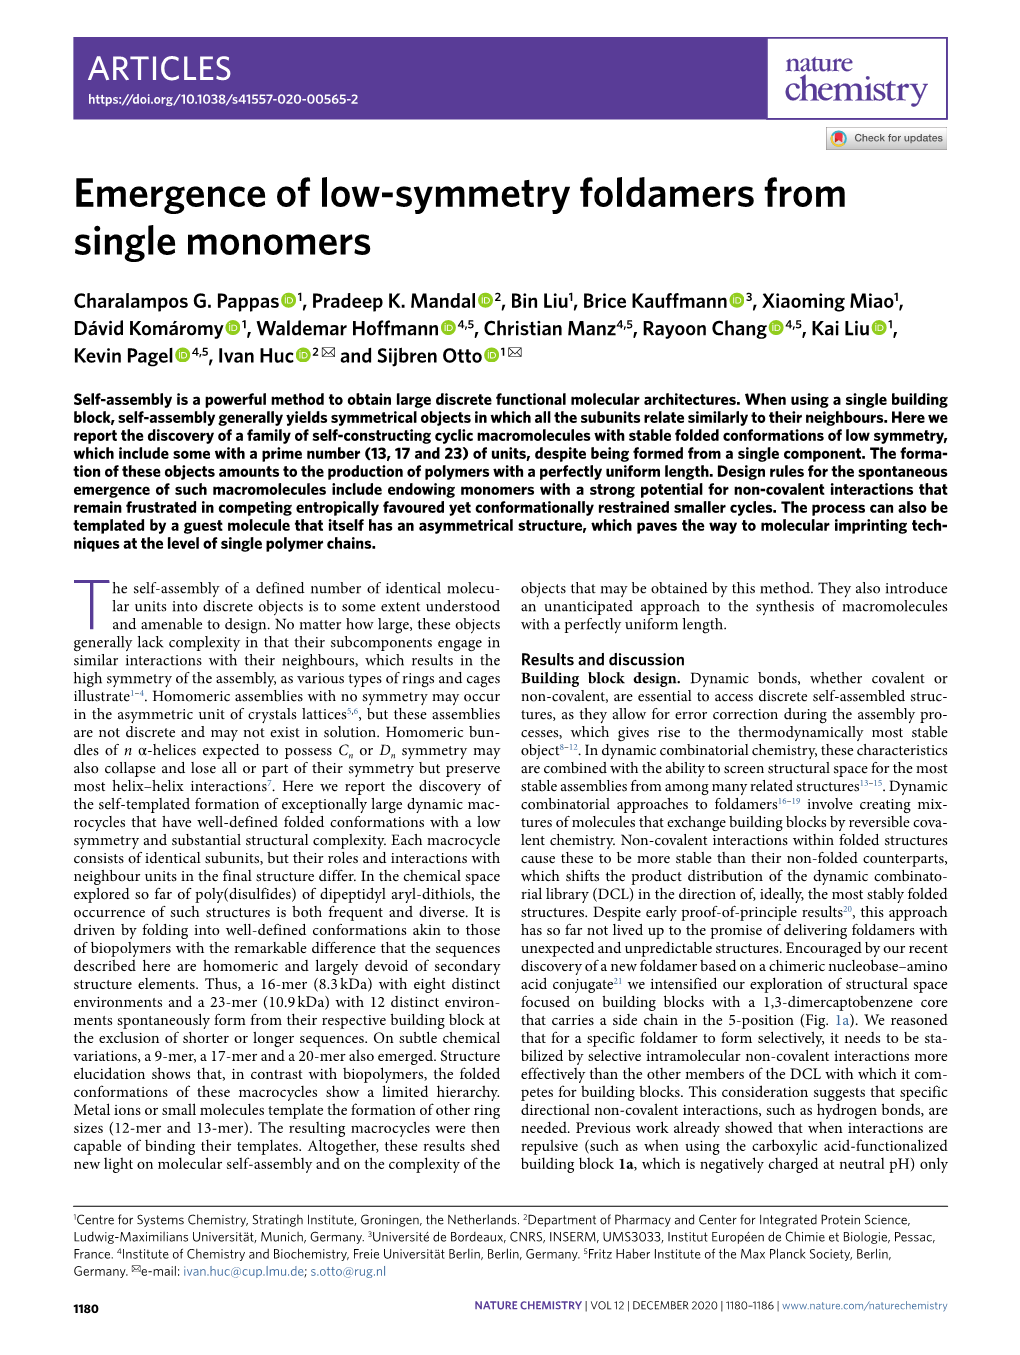 Emergence of Low-Symmetry Foldamers from Single Monomers